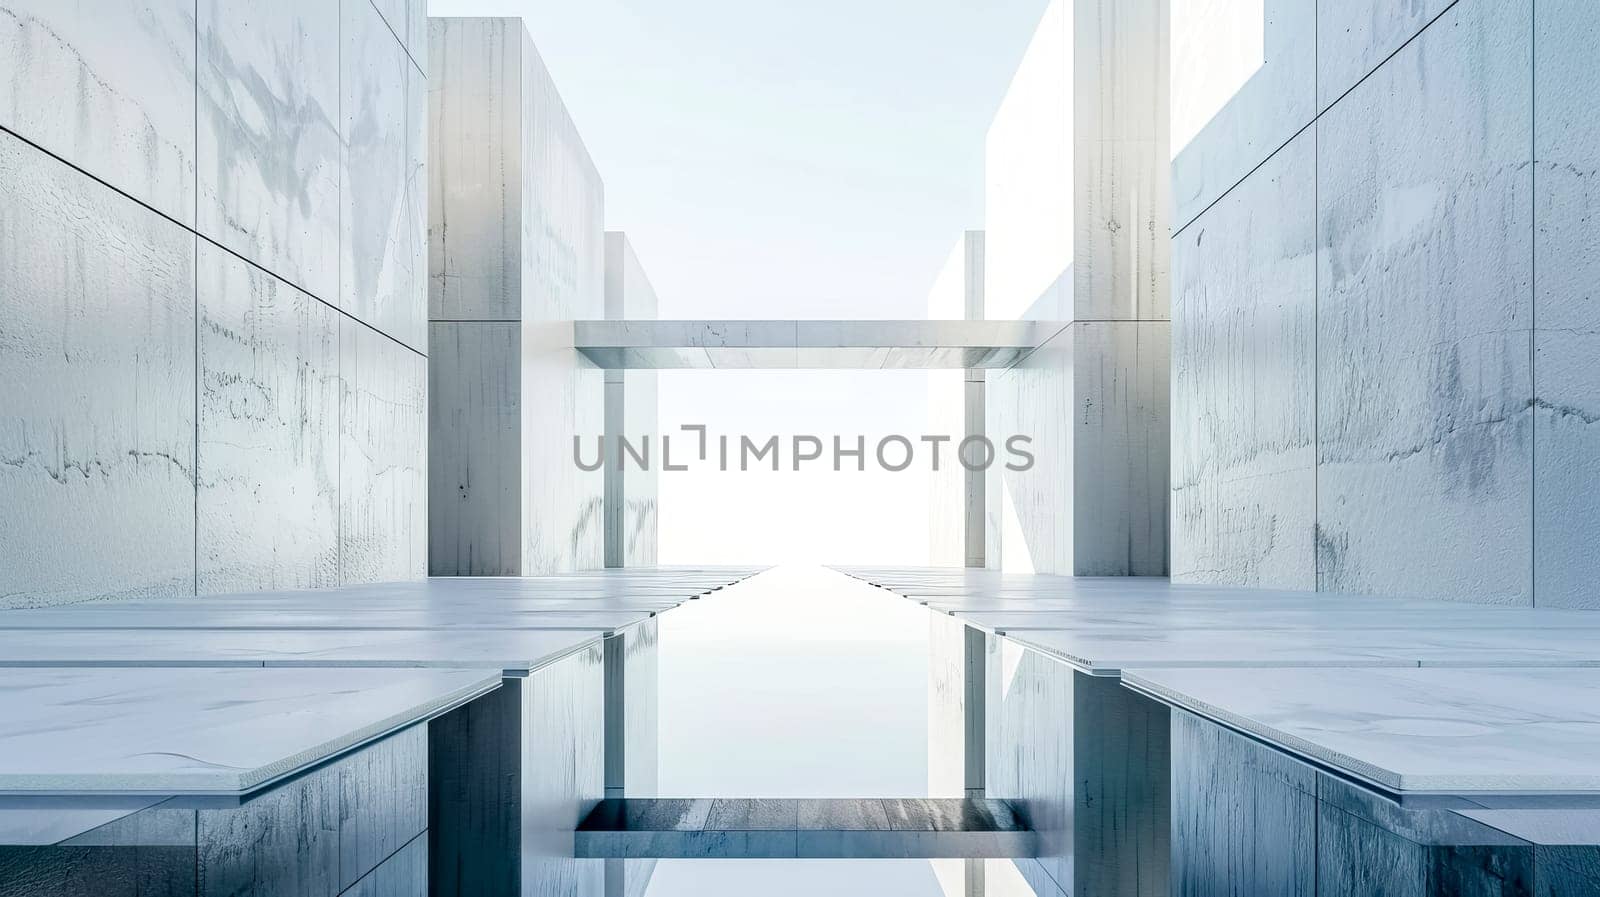 Modern minimalist architecture with infinite perspective by Edophoto